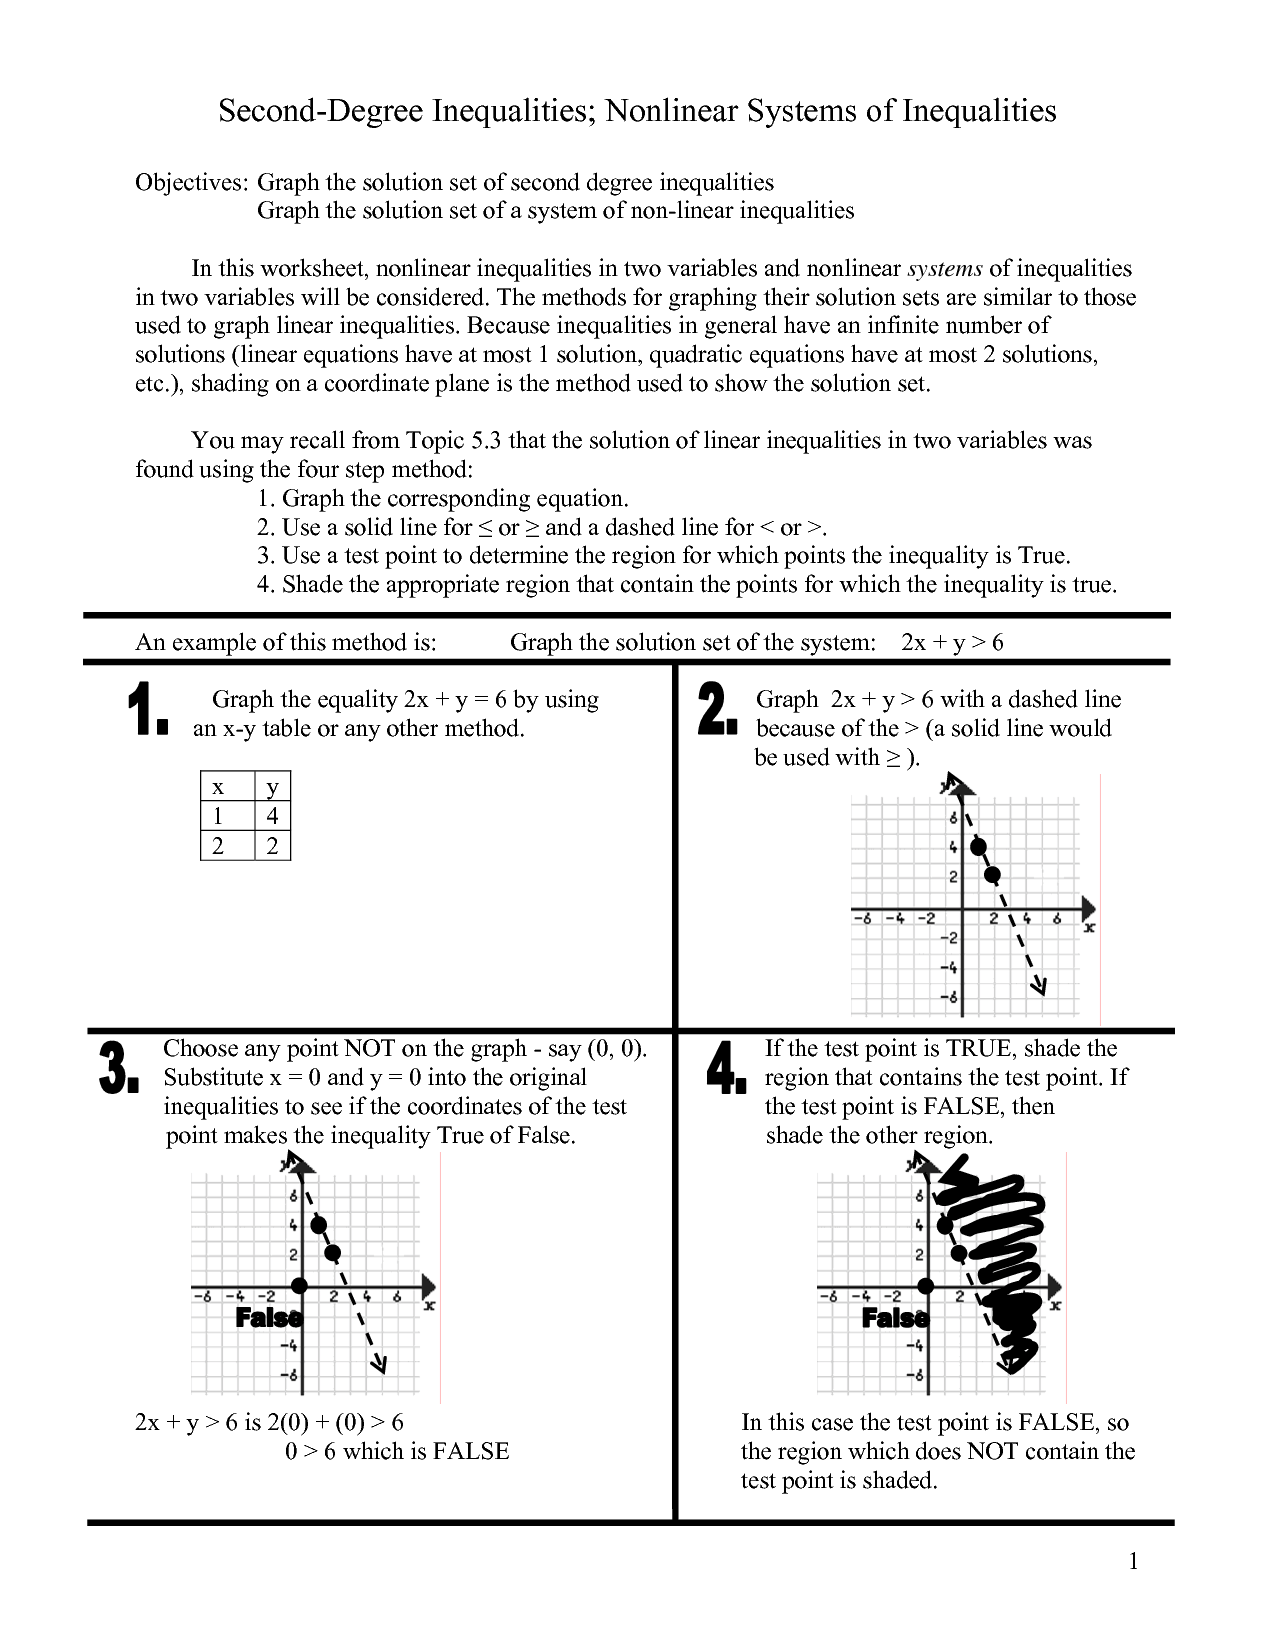 14-best-images-of-conjugation-worksheet-2-answers-el-verbo-exacto-answers-chemistry-unit-5